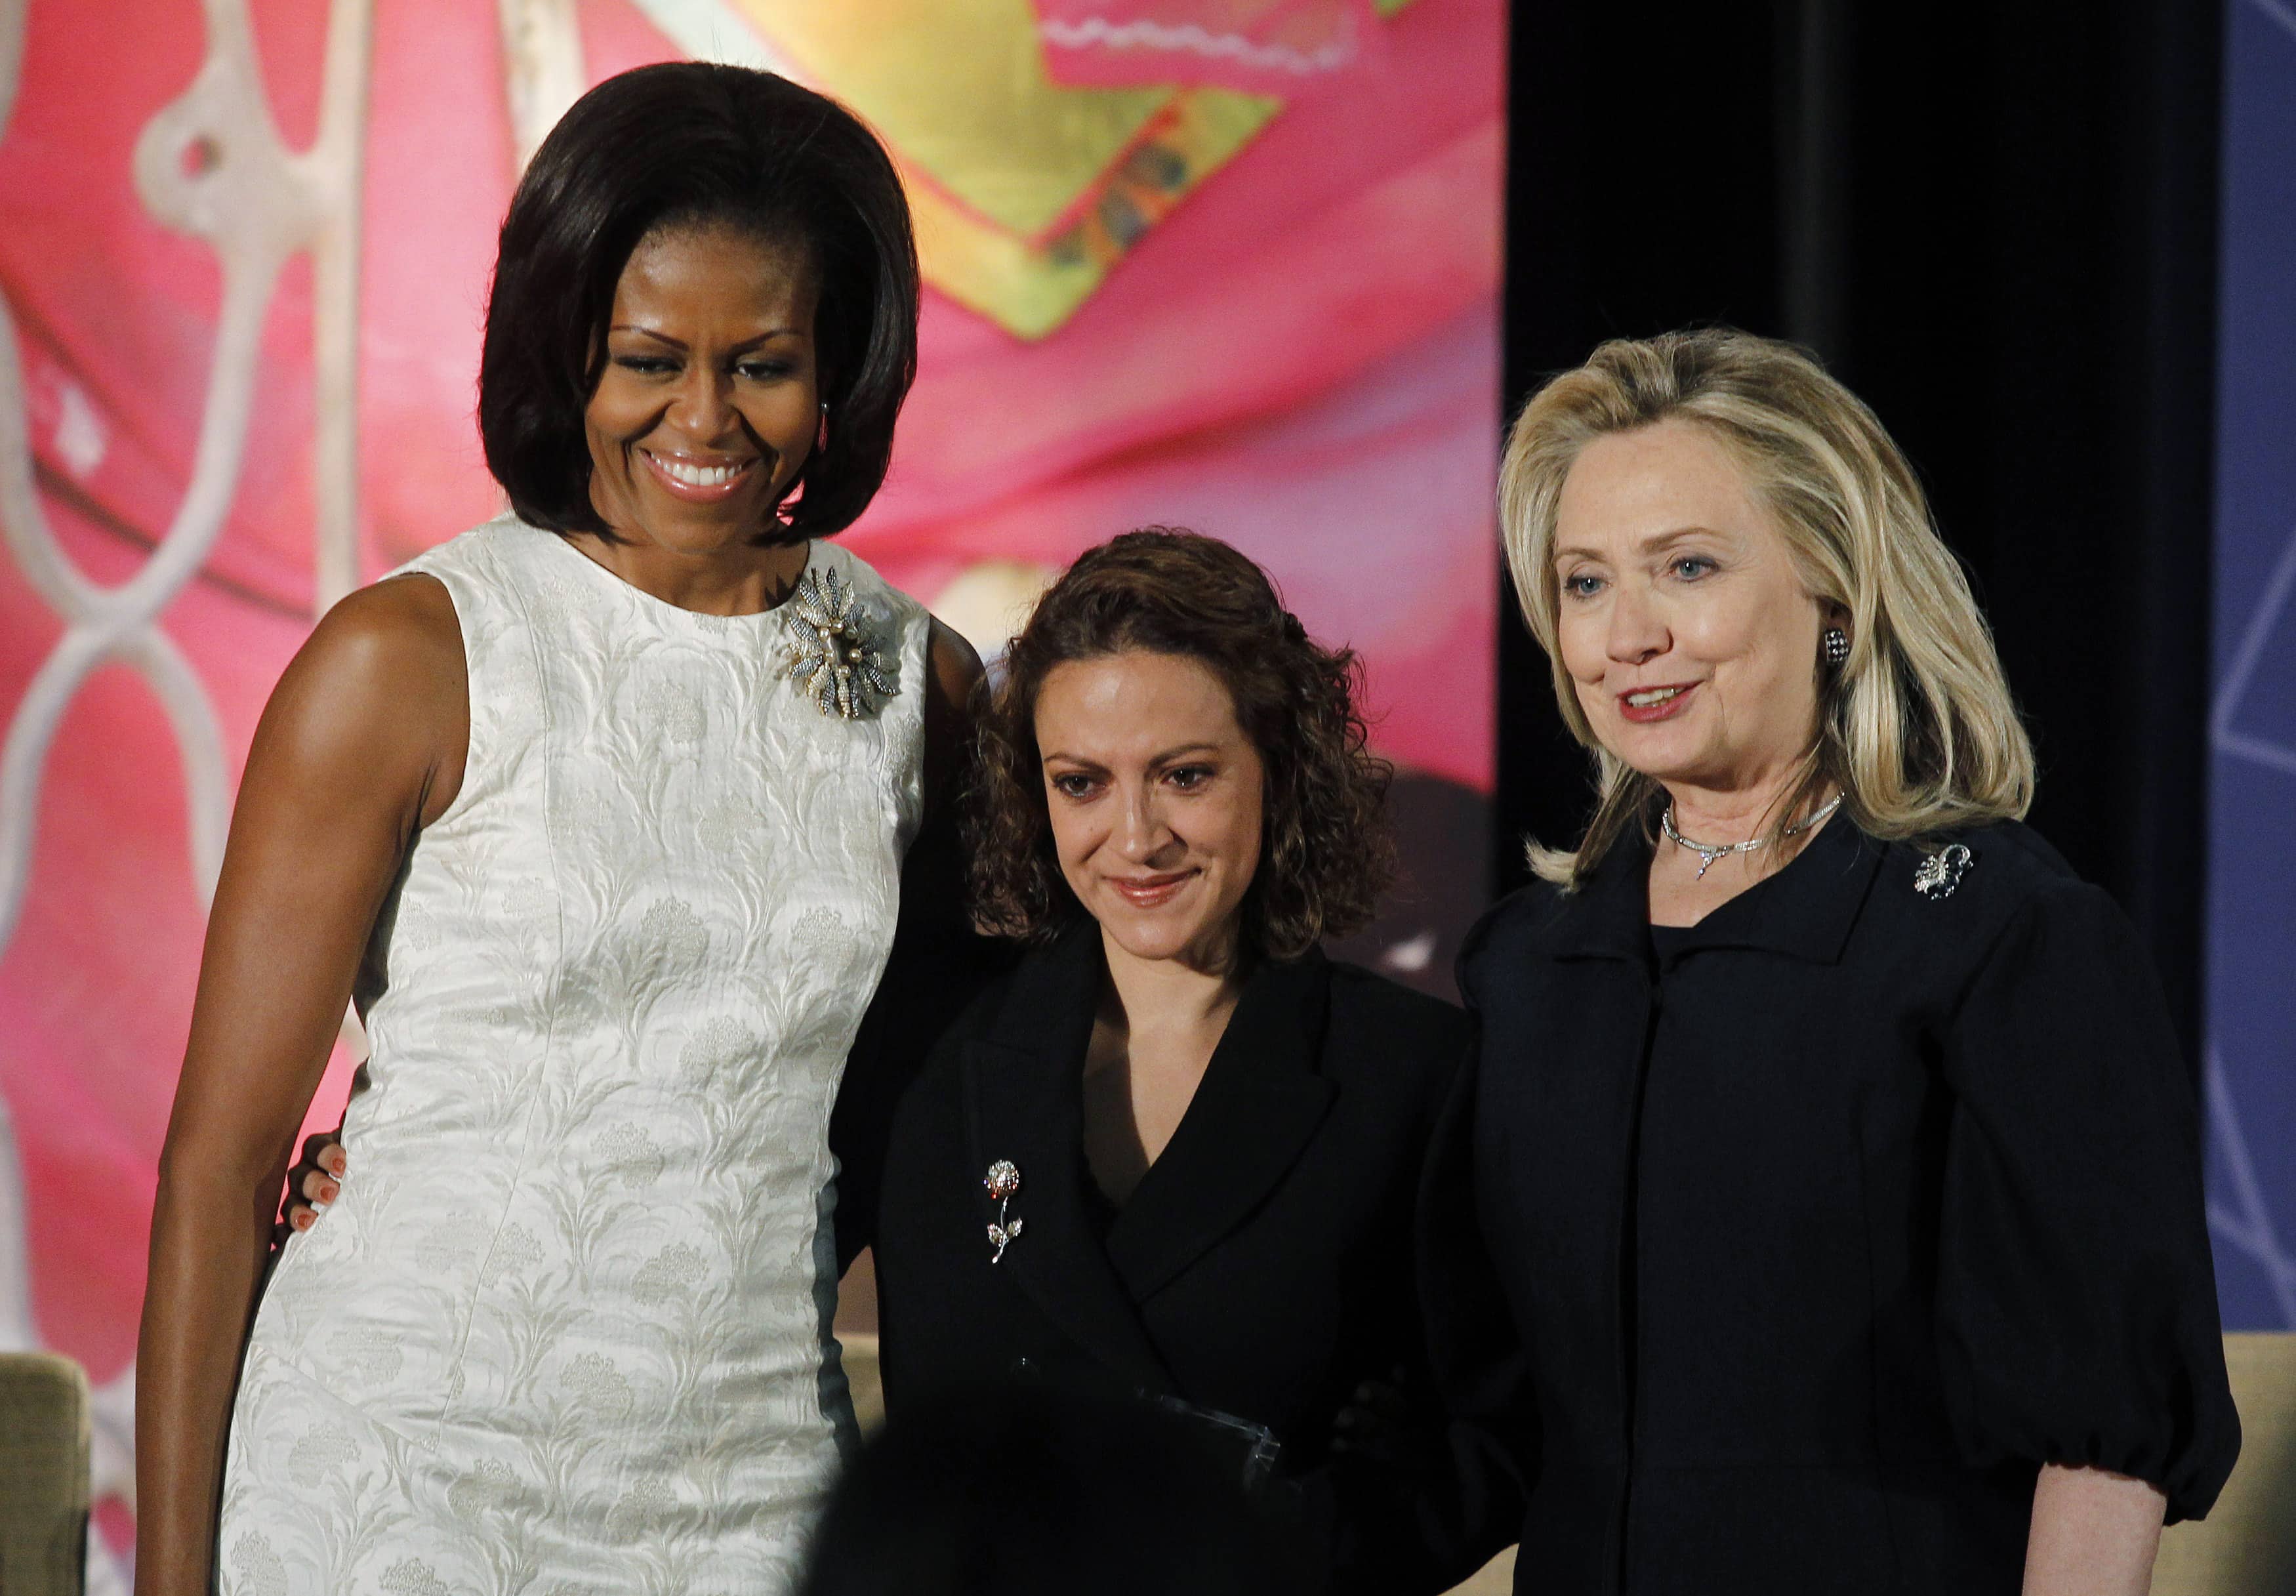 Jineth Bedoya (c) receives the International Women of Courage Award from US First Lady Michelle Obama (l) and US Secretary of State Hillary Clinton, in March 2012, REUTERS/Gary Cameron